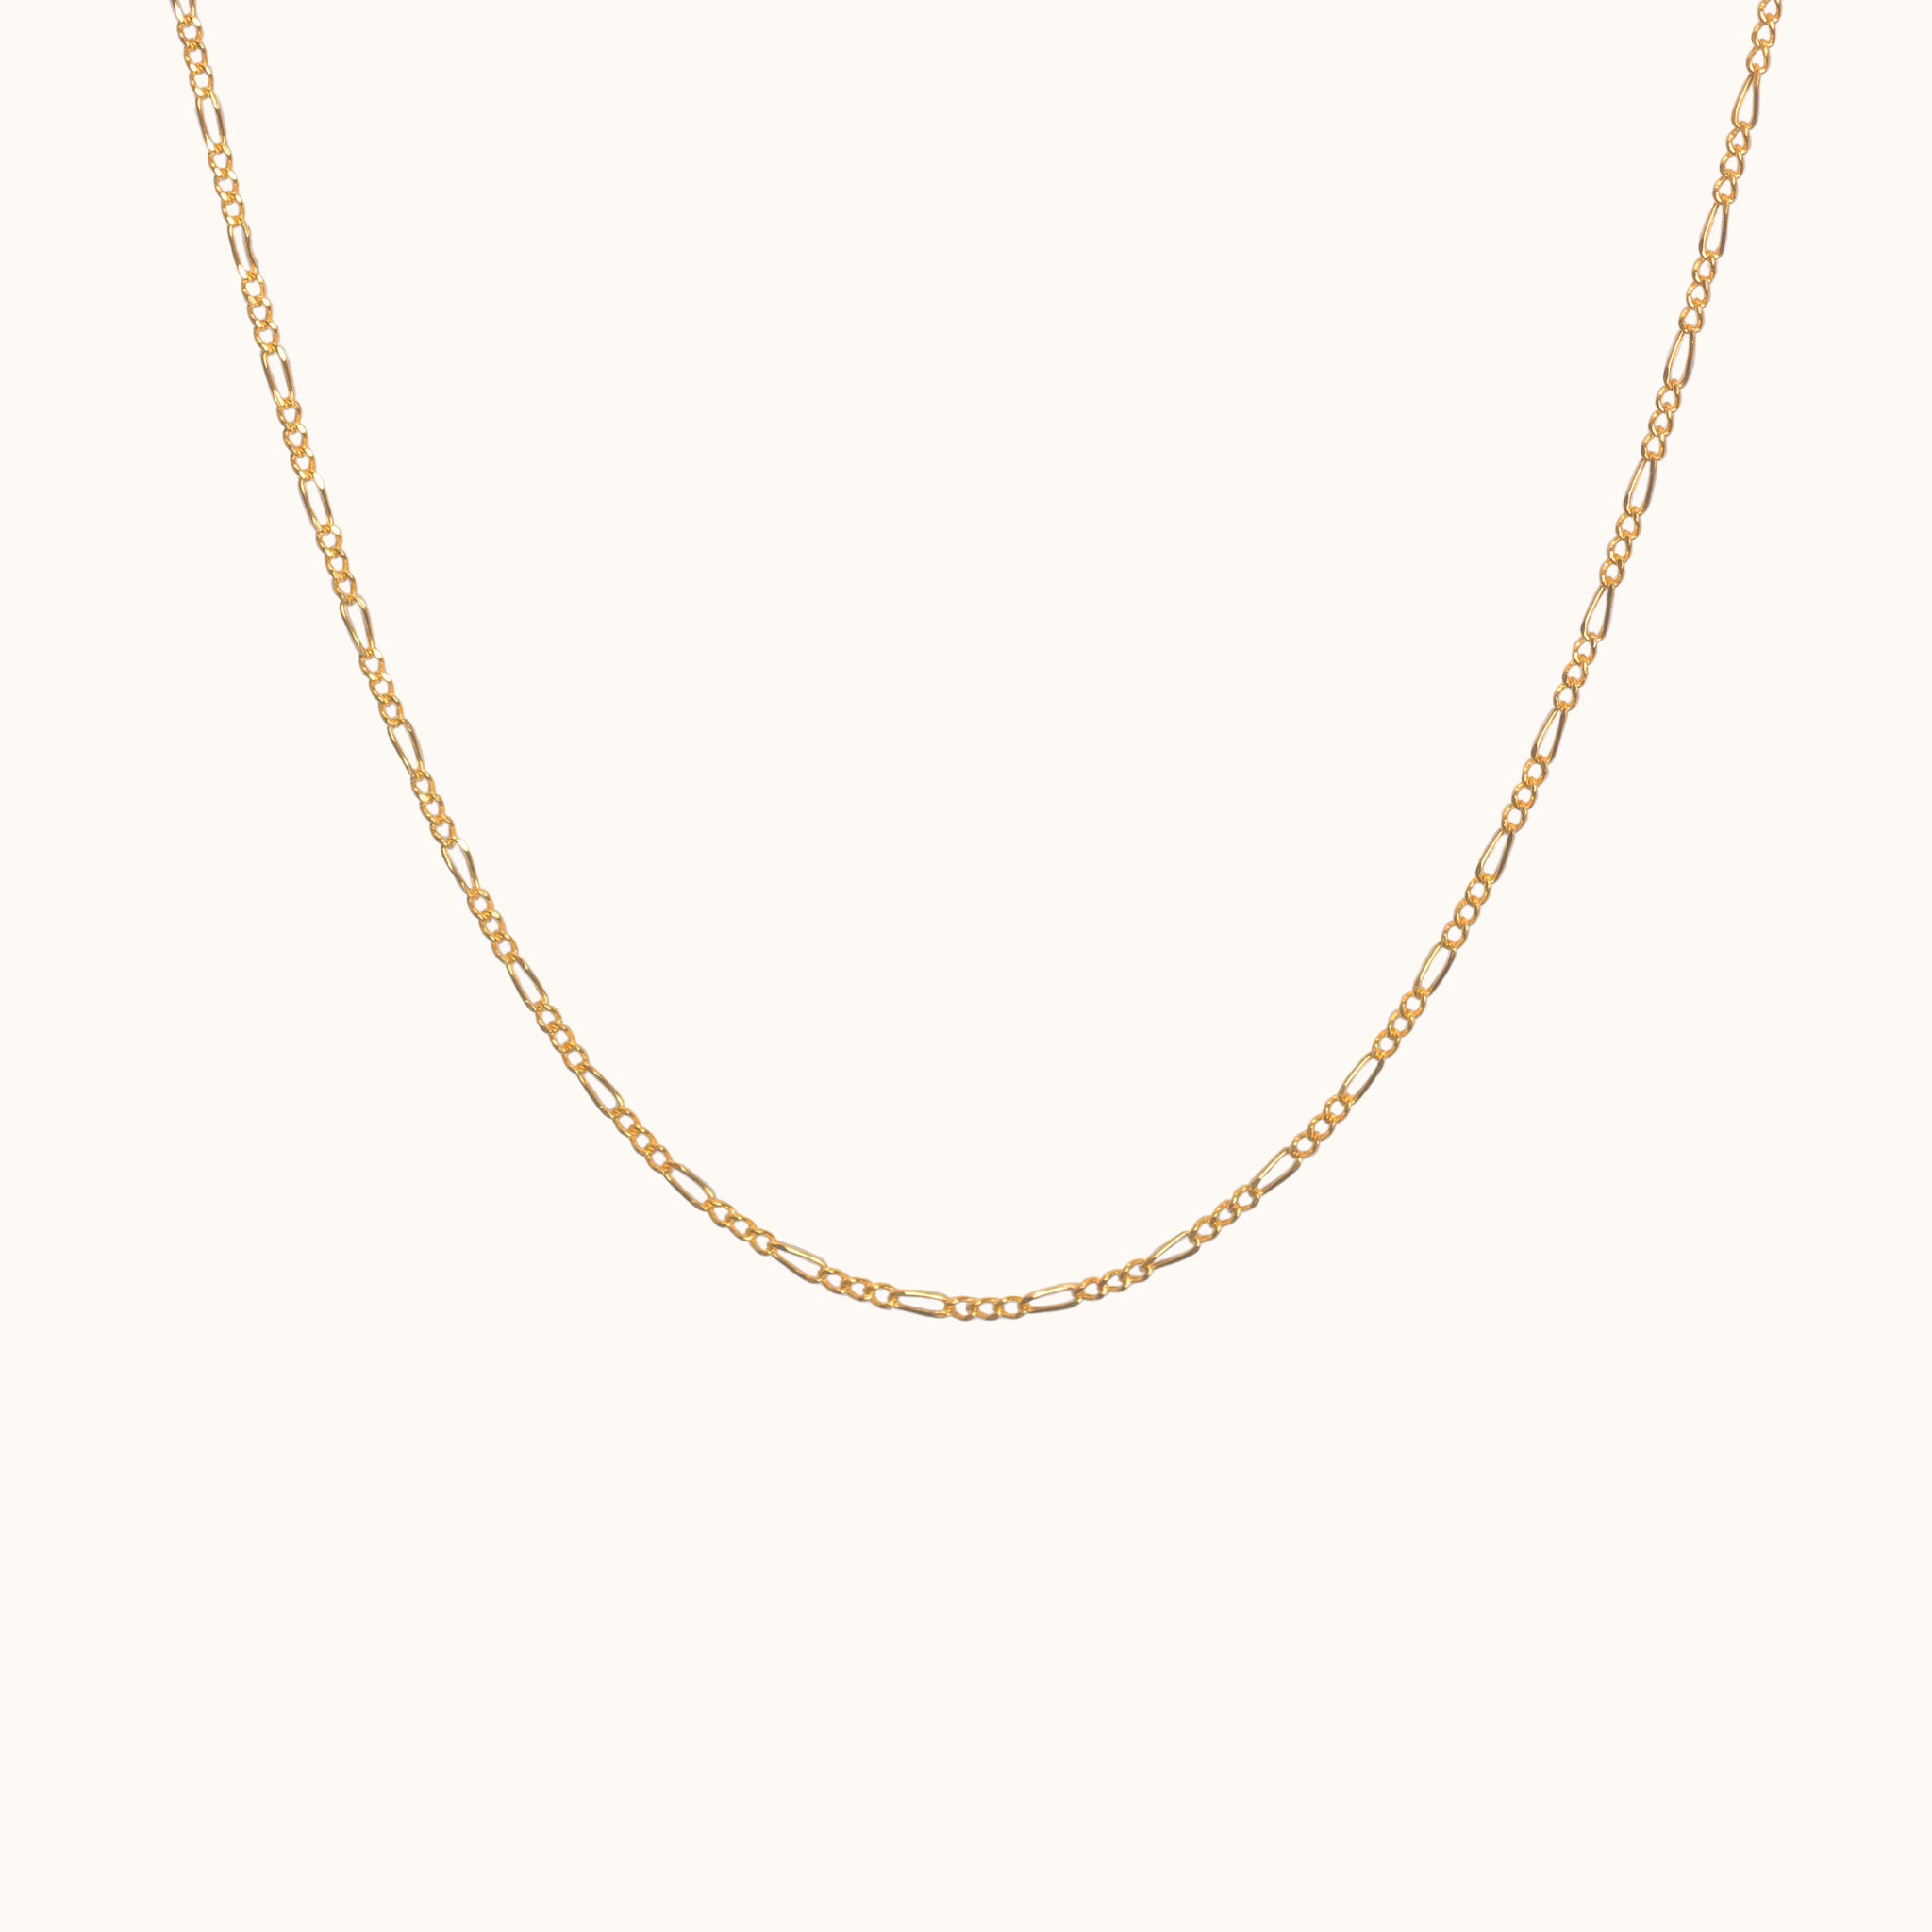 14K Solid Gold Figaro Link Flat Chain Necklace by Doviana